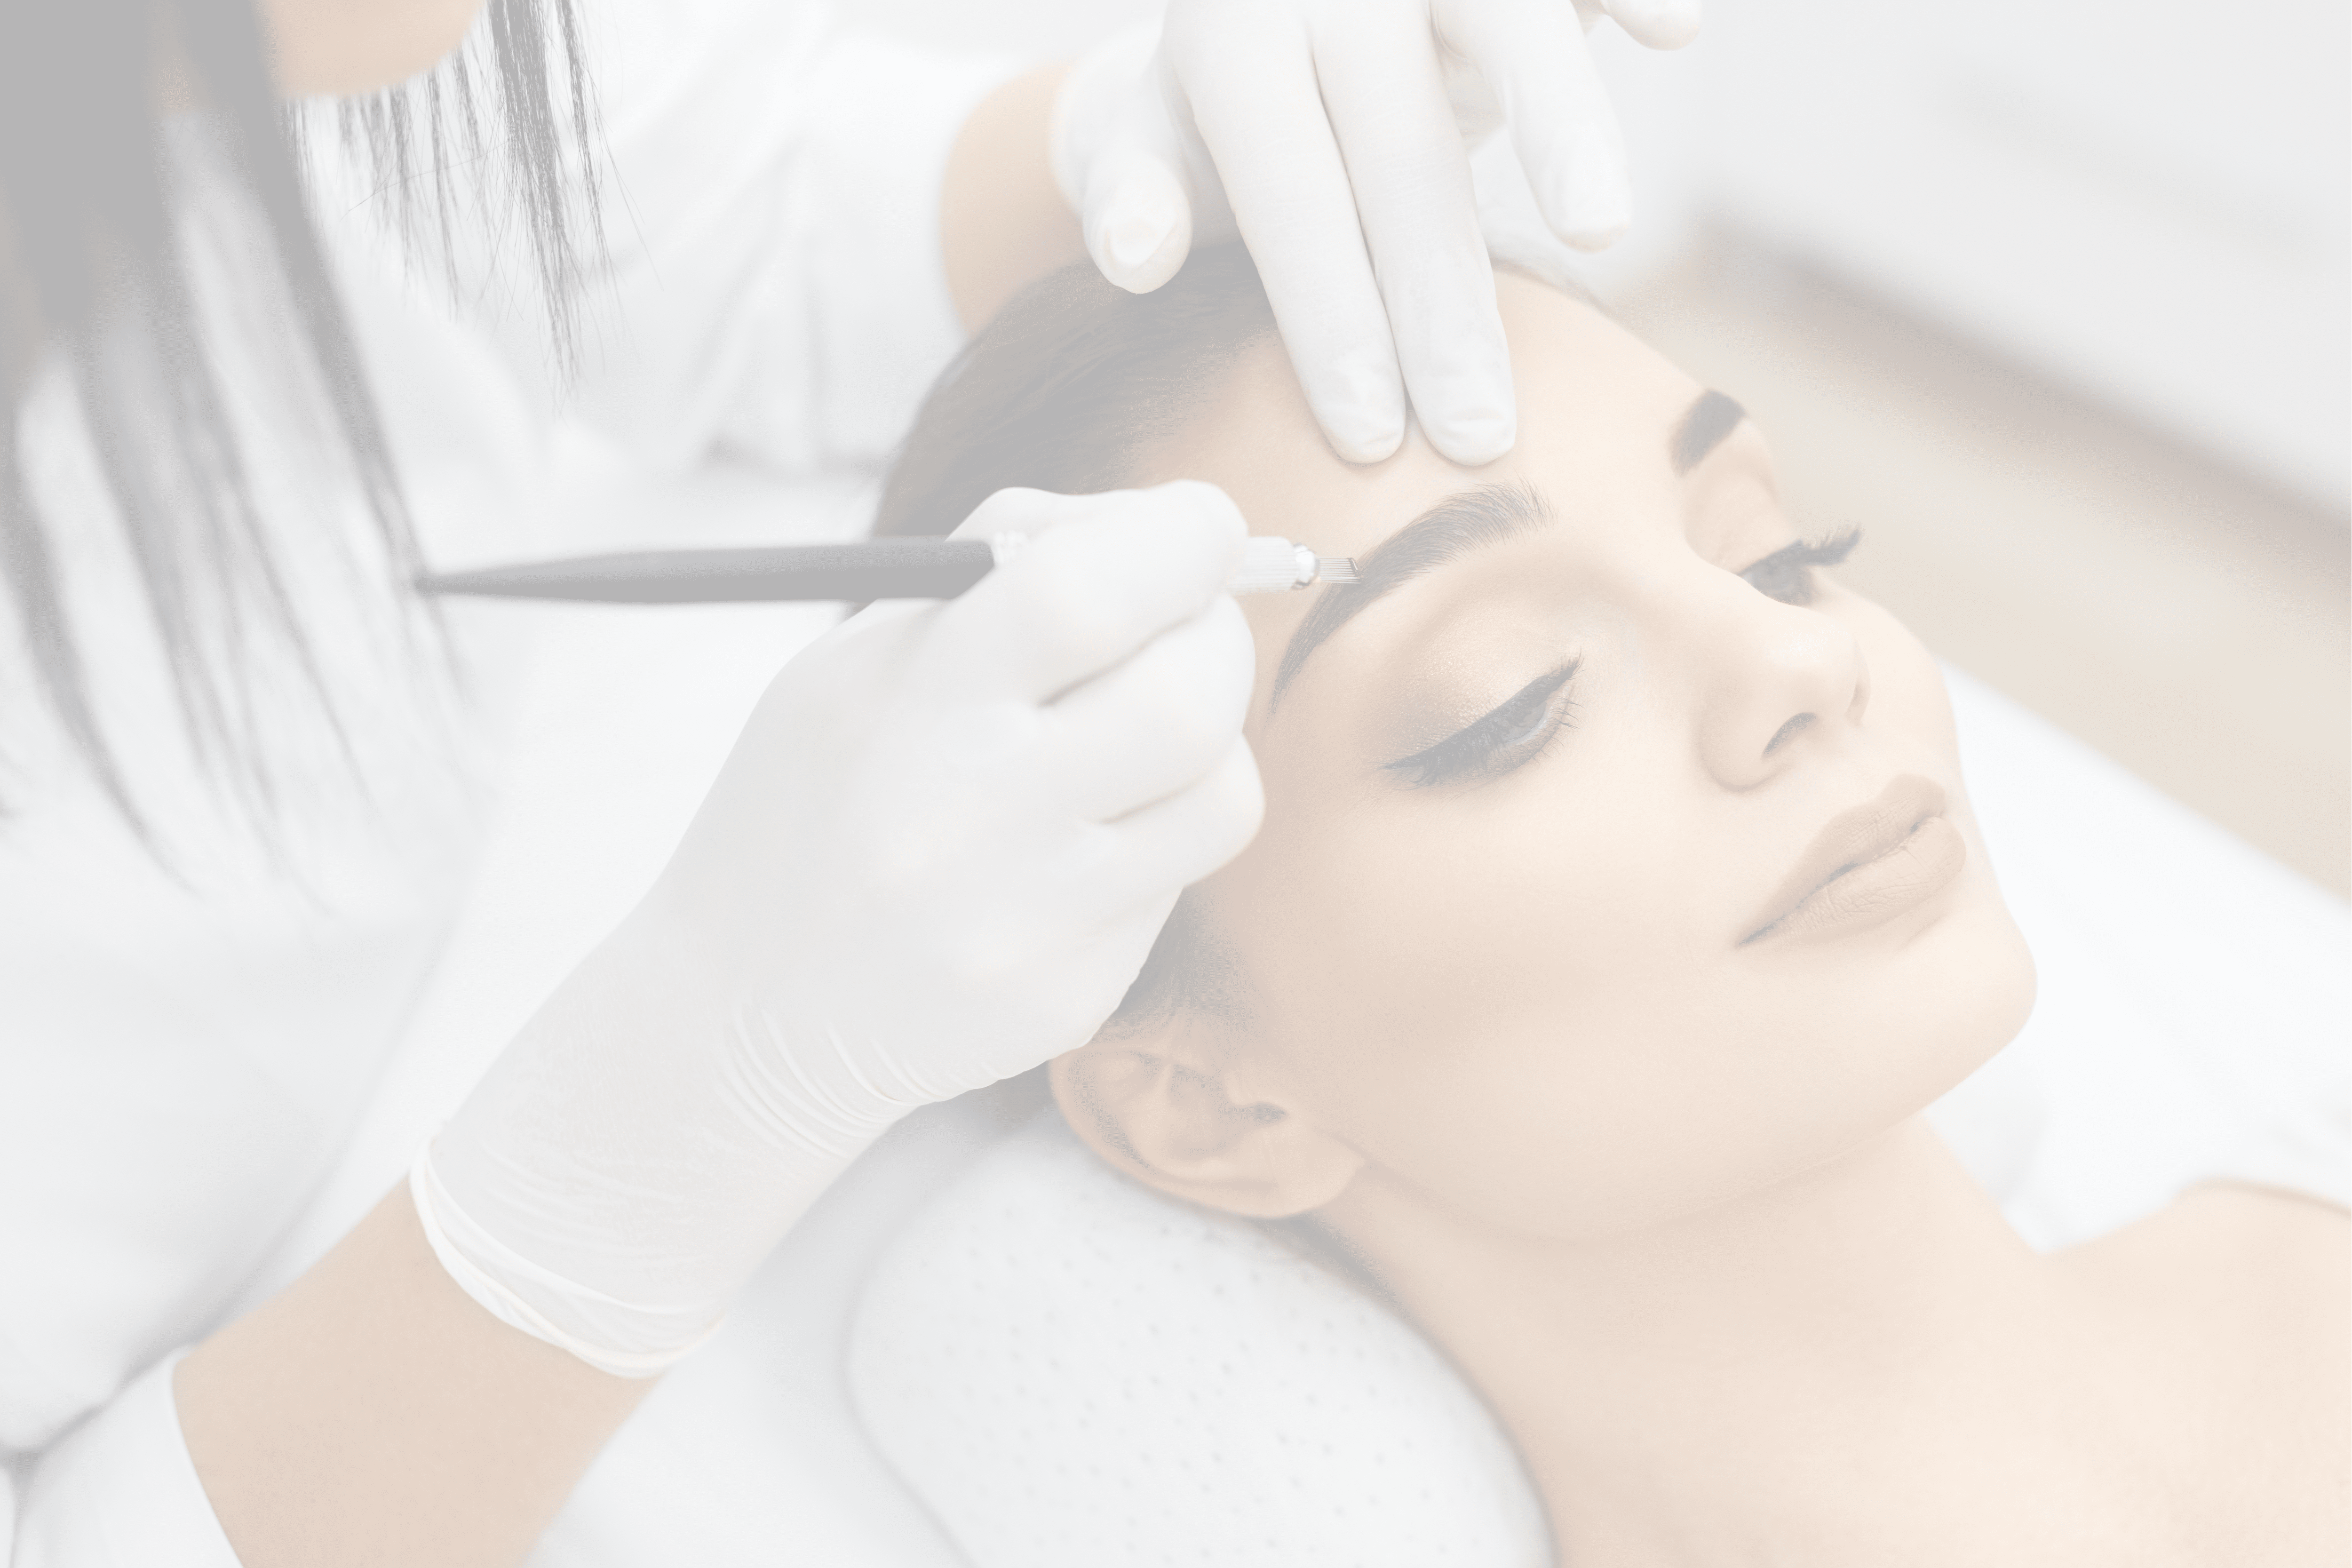 Top Tips For Starting a Microblading Business